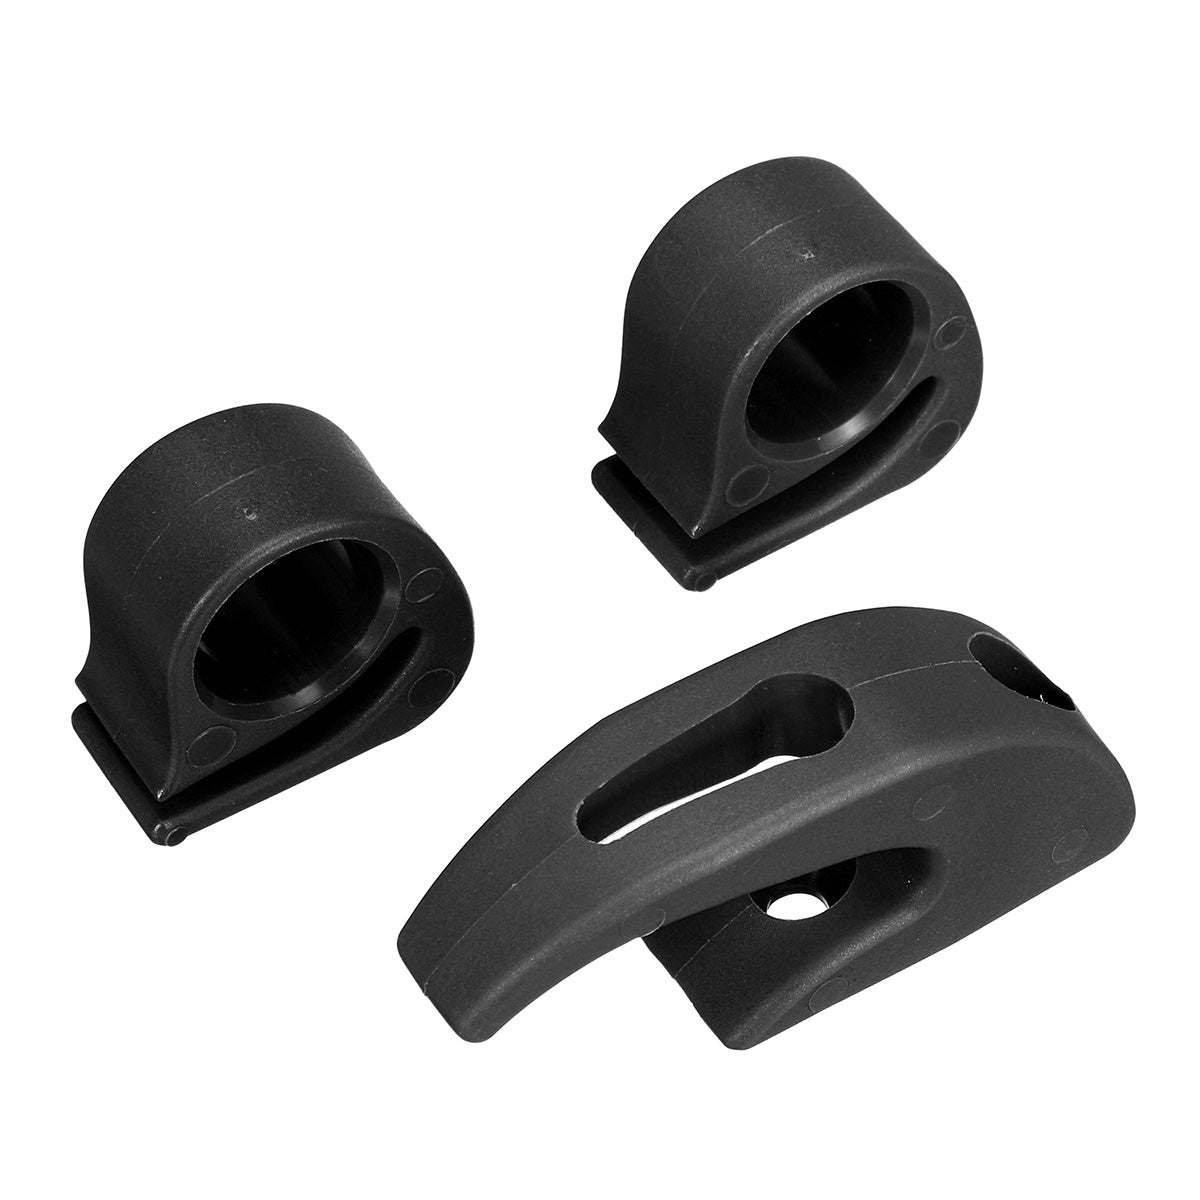 Black Scooter Accessories Combination Bracket Hook Damping Set For M365